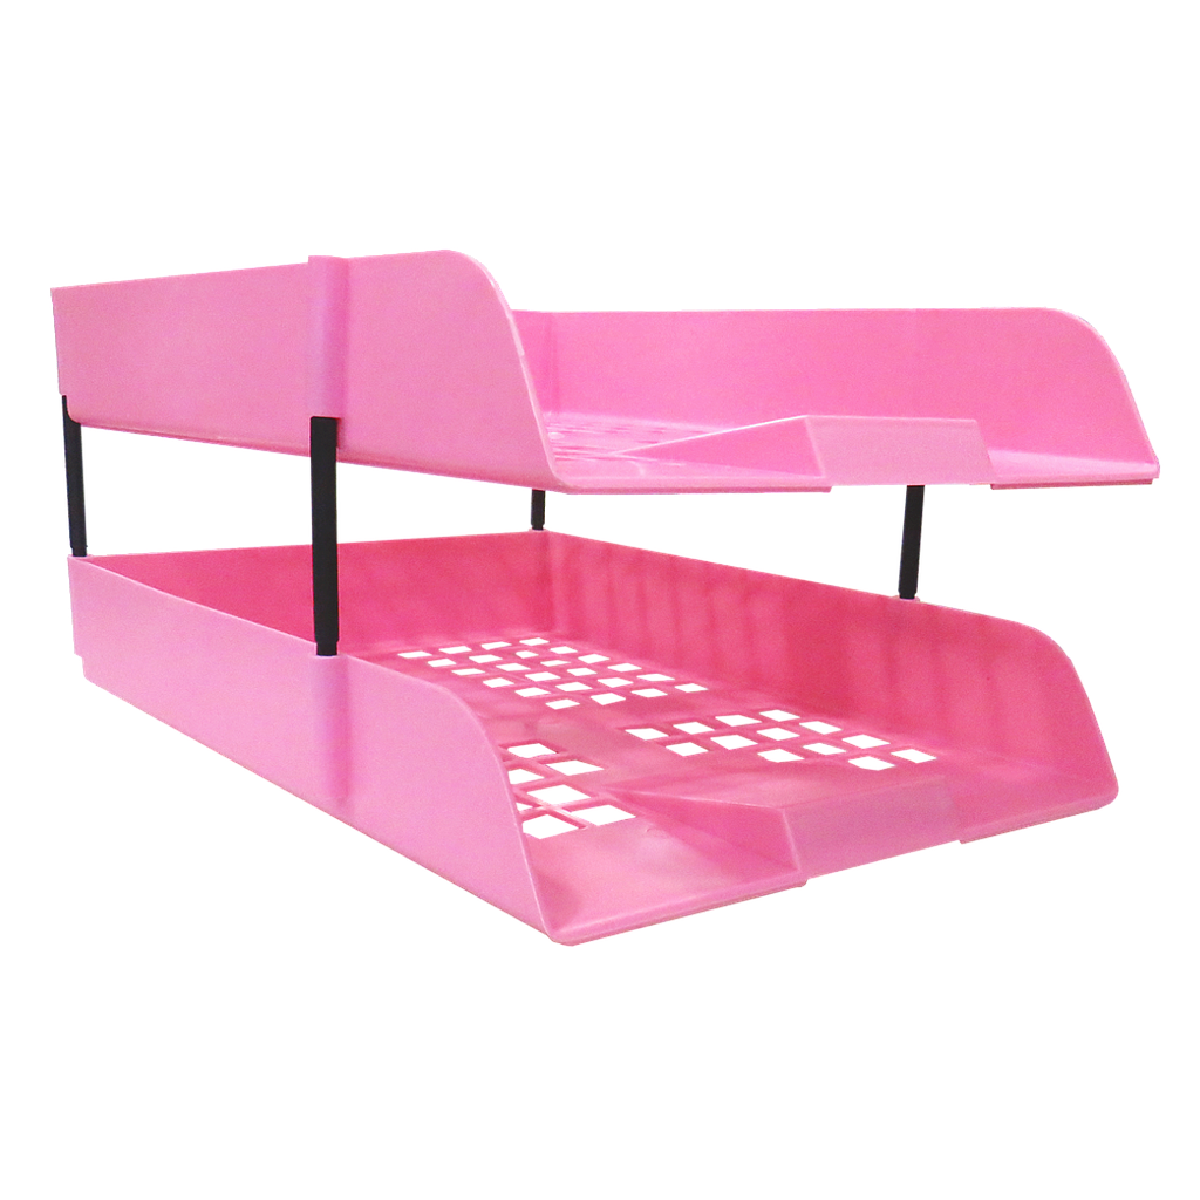 NEXX Letter / Paper Tray Pink